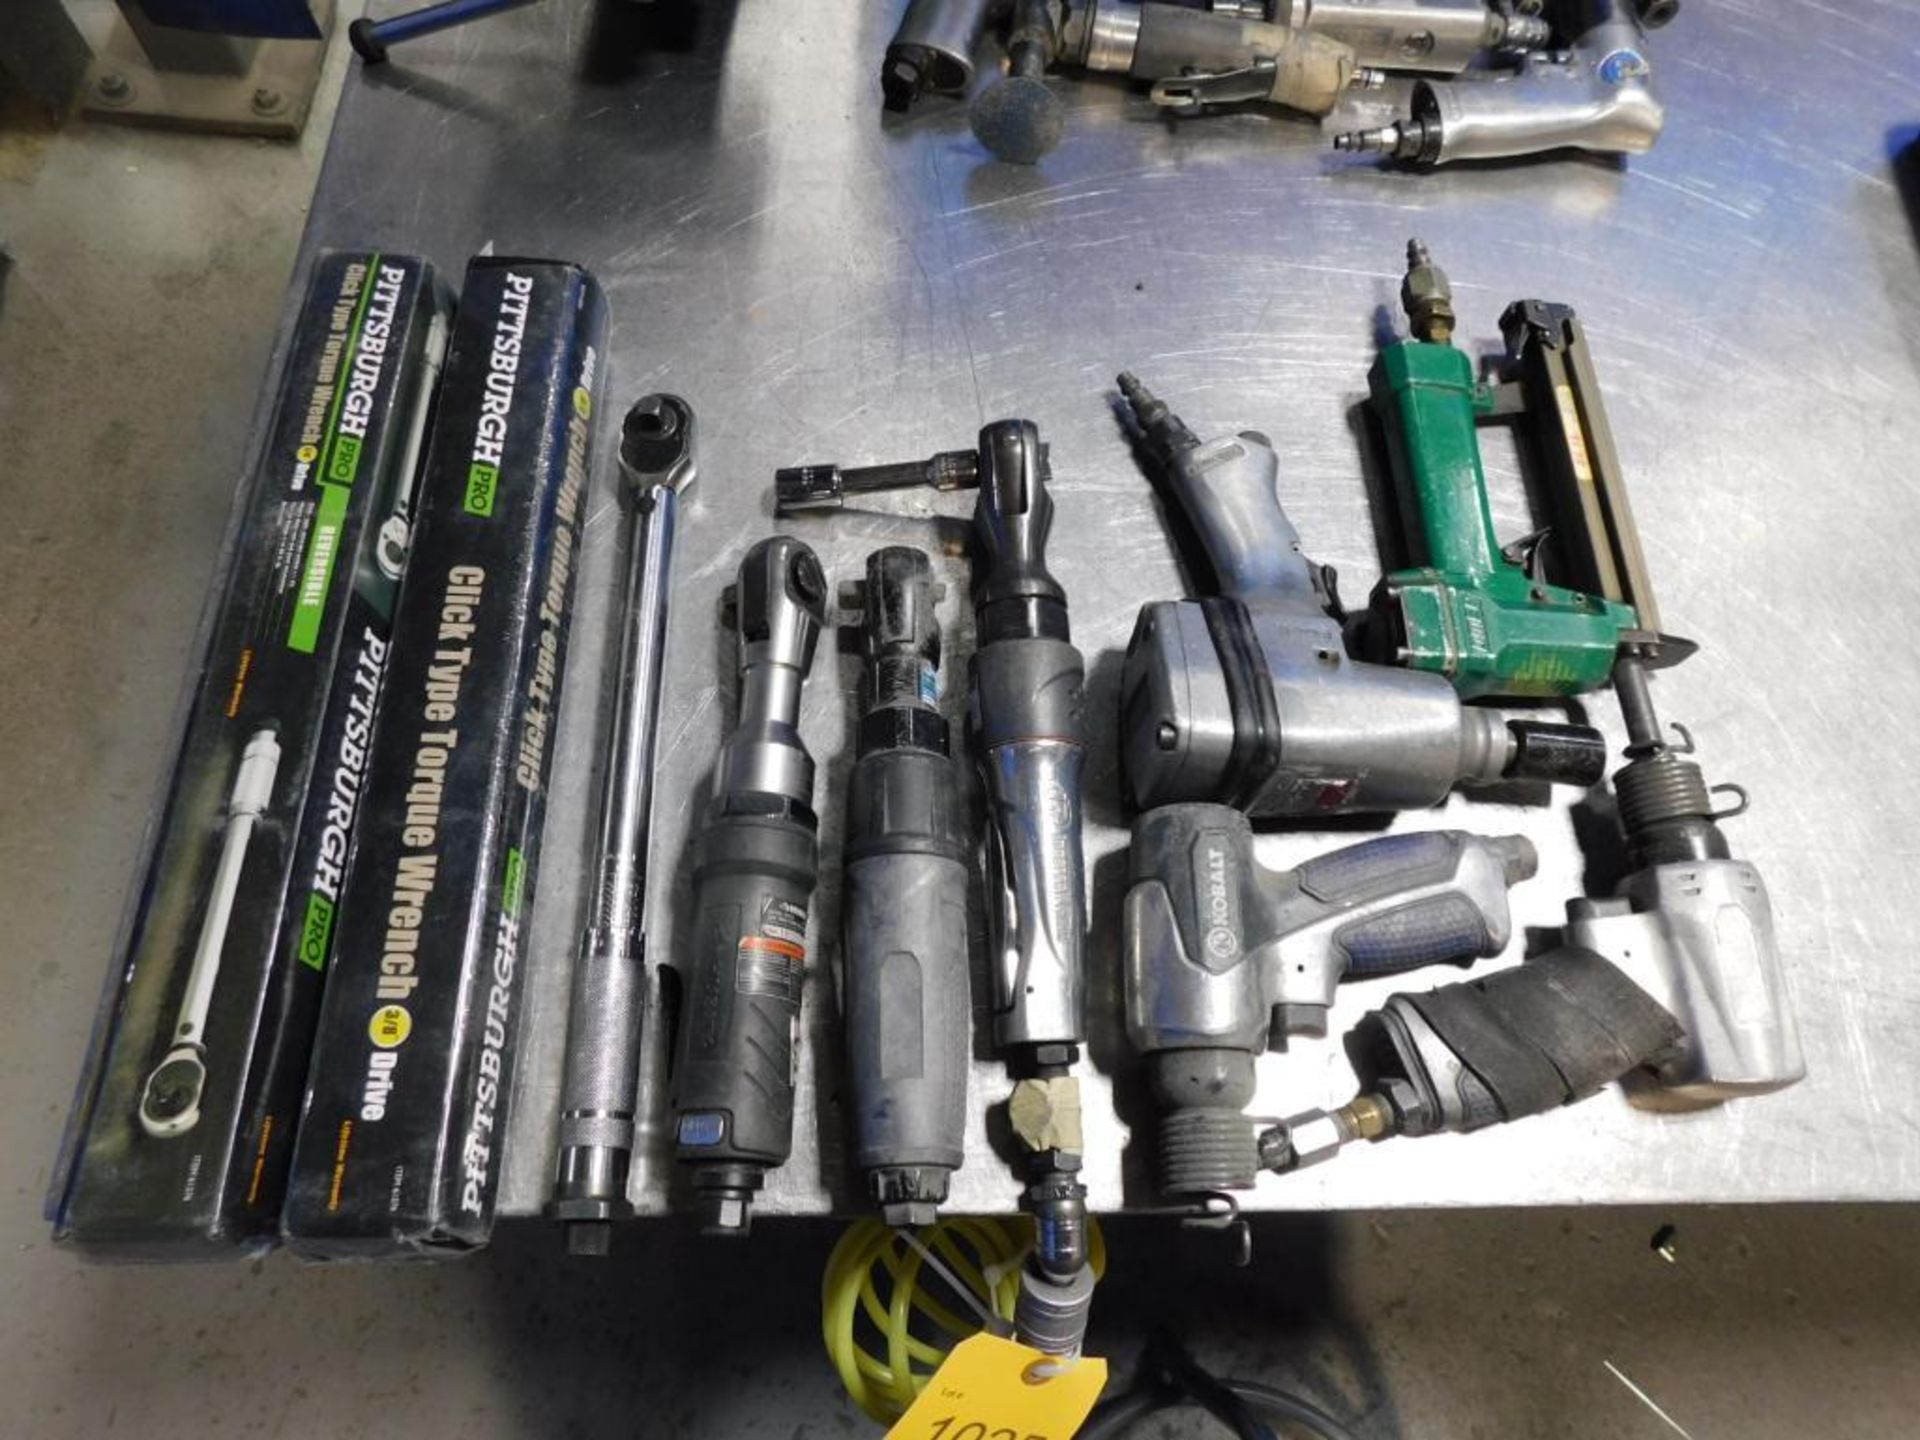 LOT: Assorted Pnuematic Ratchets, Impacts, Chisels, Torque Wrenches